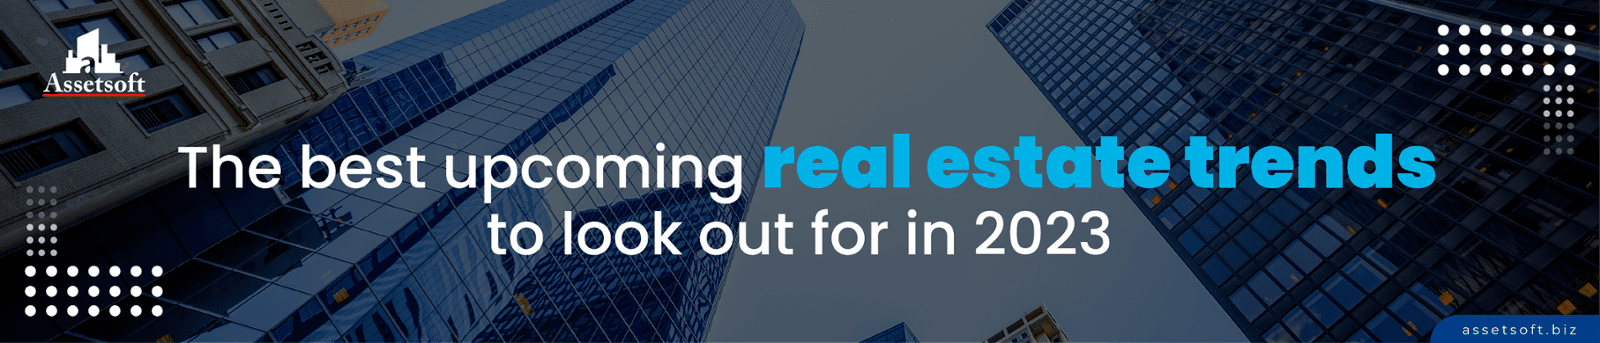 The Best Upcoming Real Estate Trends To Look Out For In 2023 Rect 